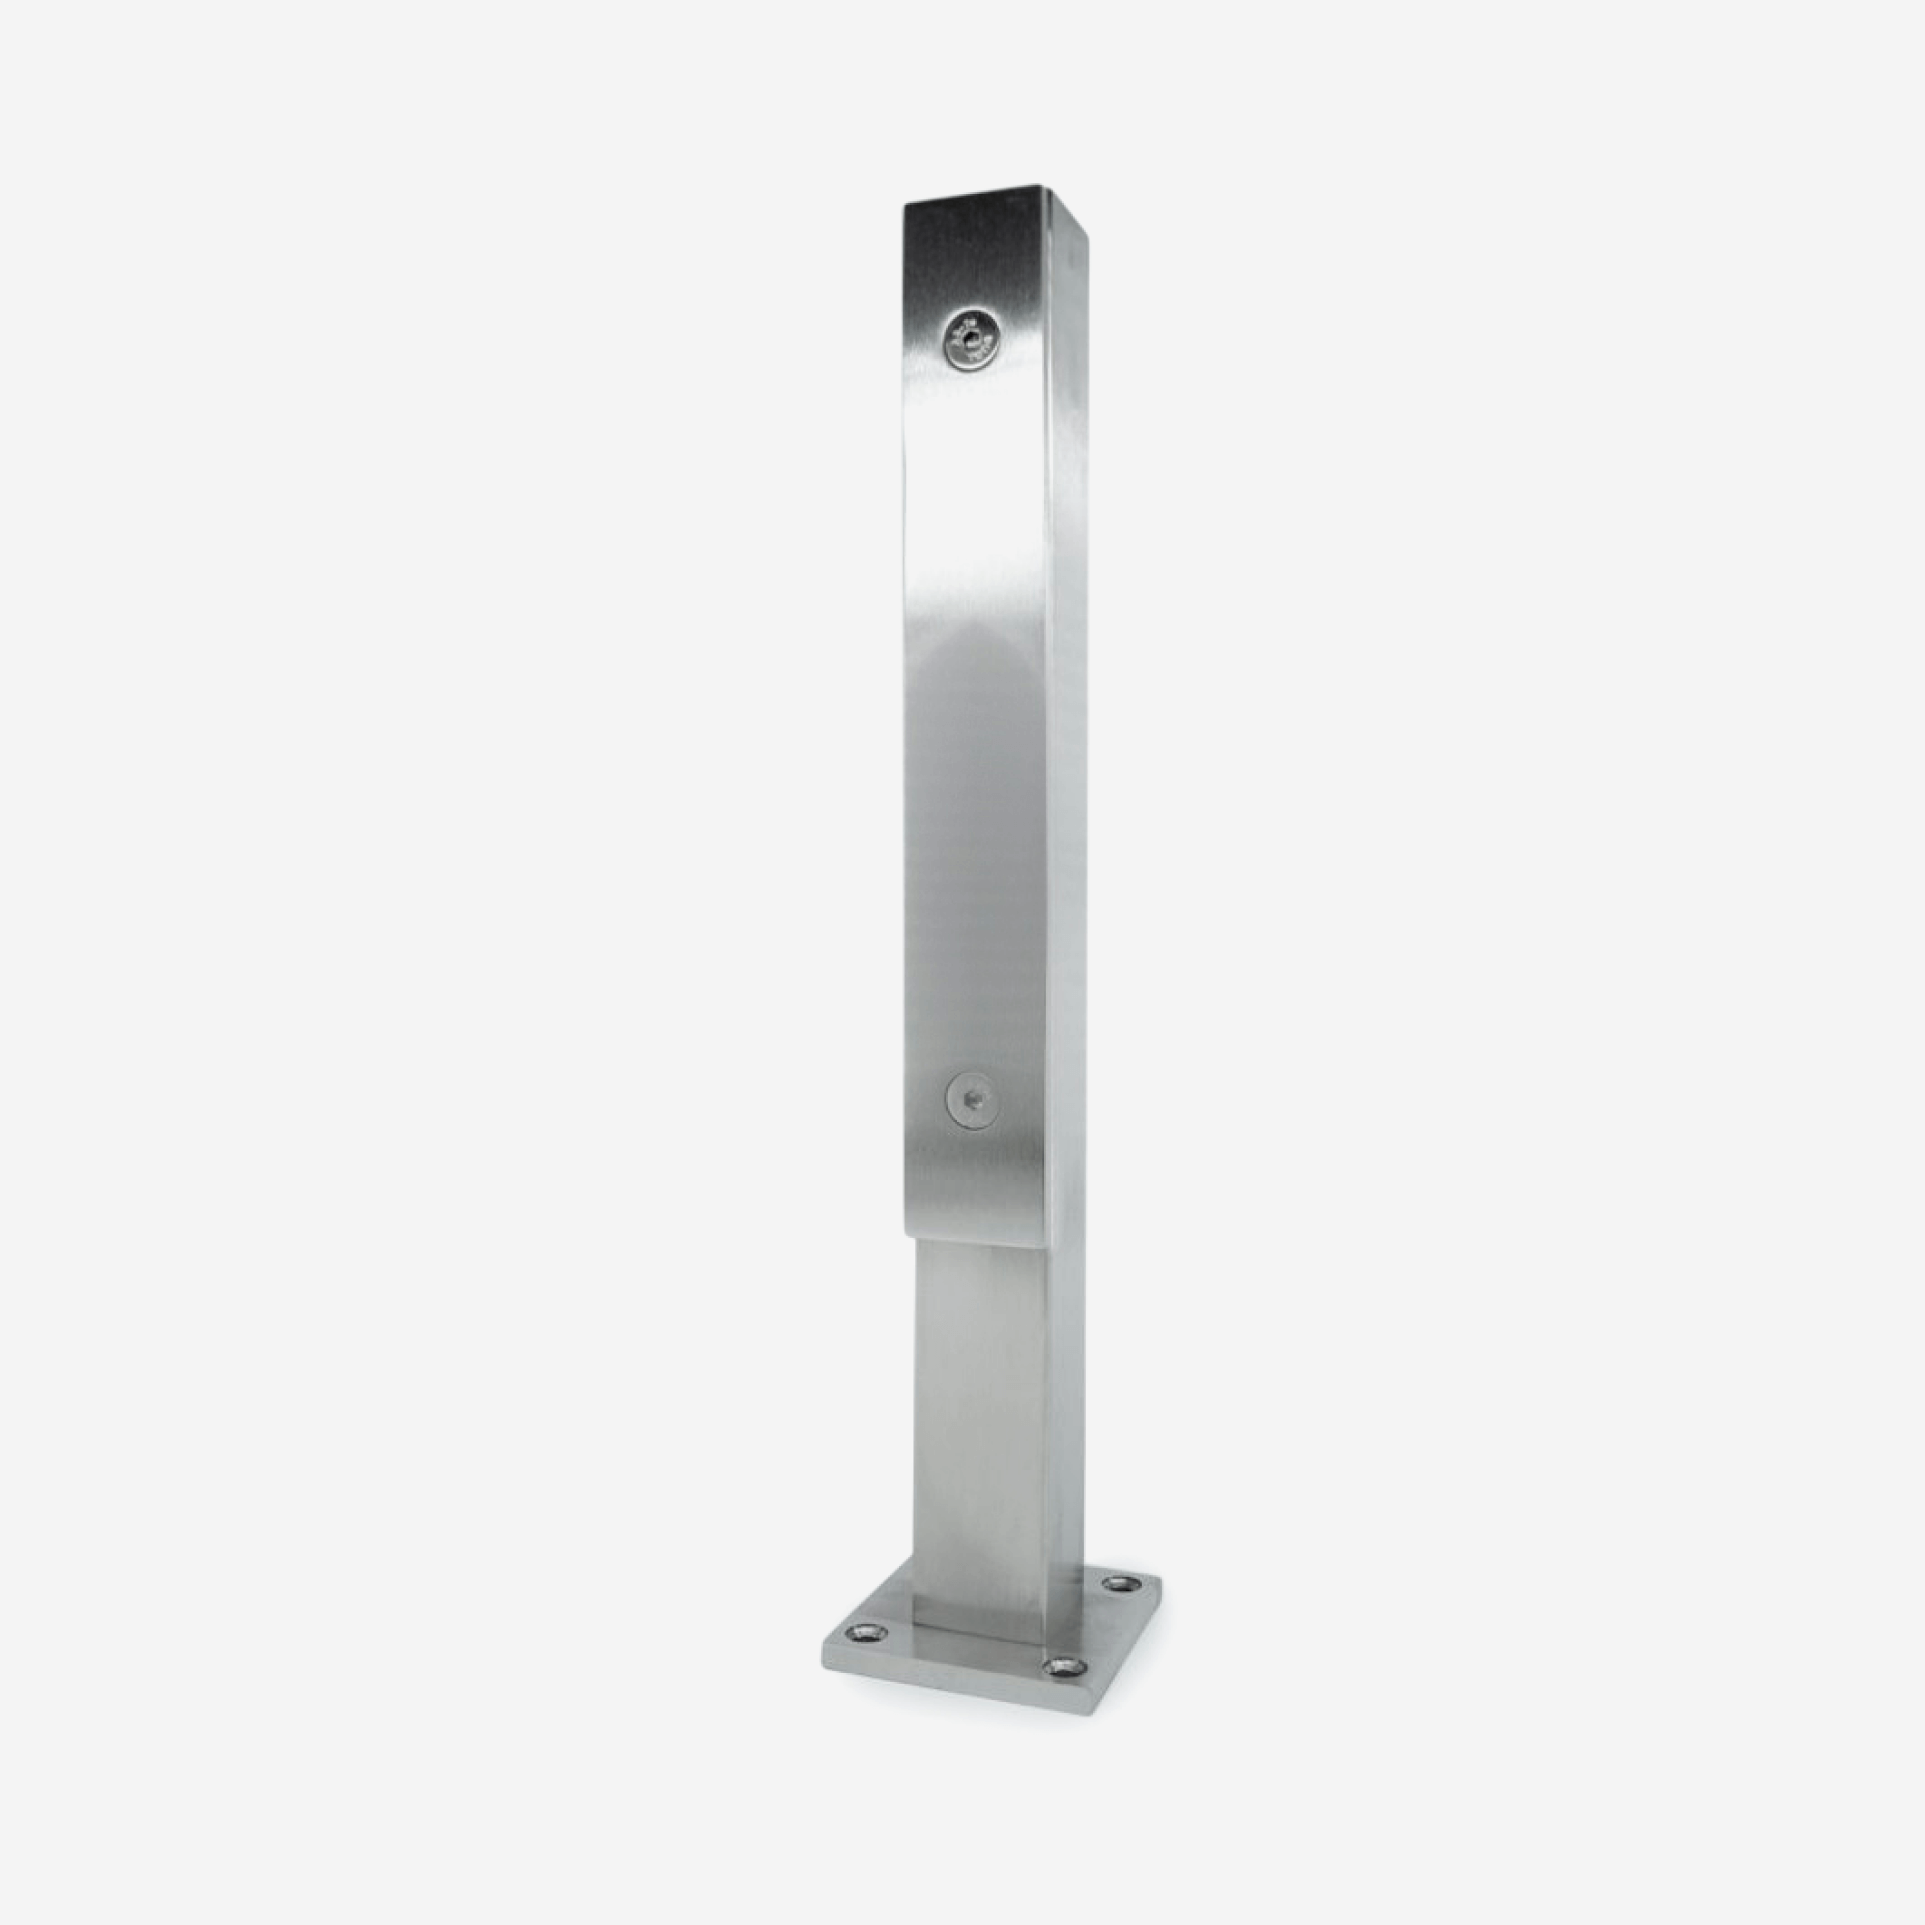 CG Brushed Stainless Steel Post - 15-3/4"